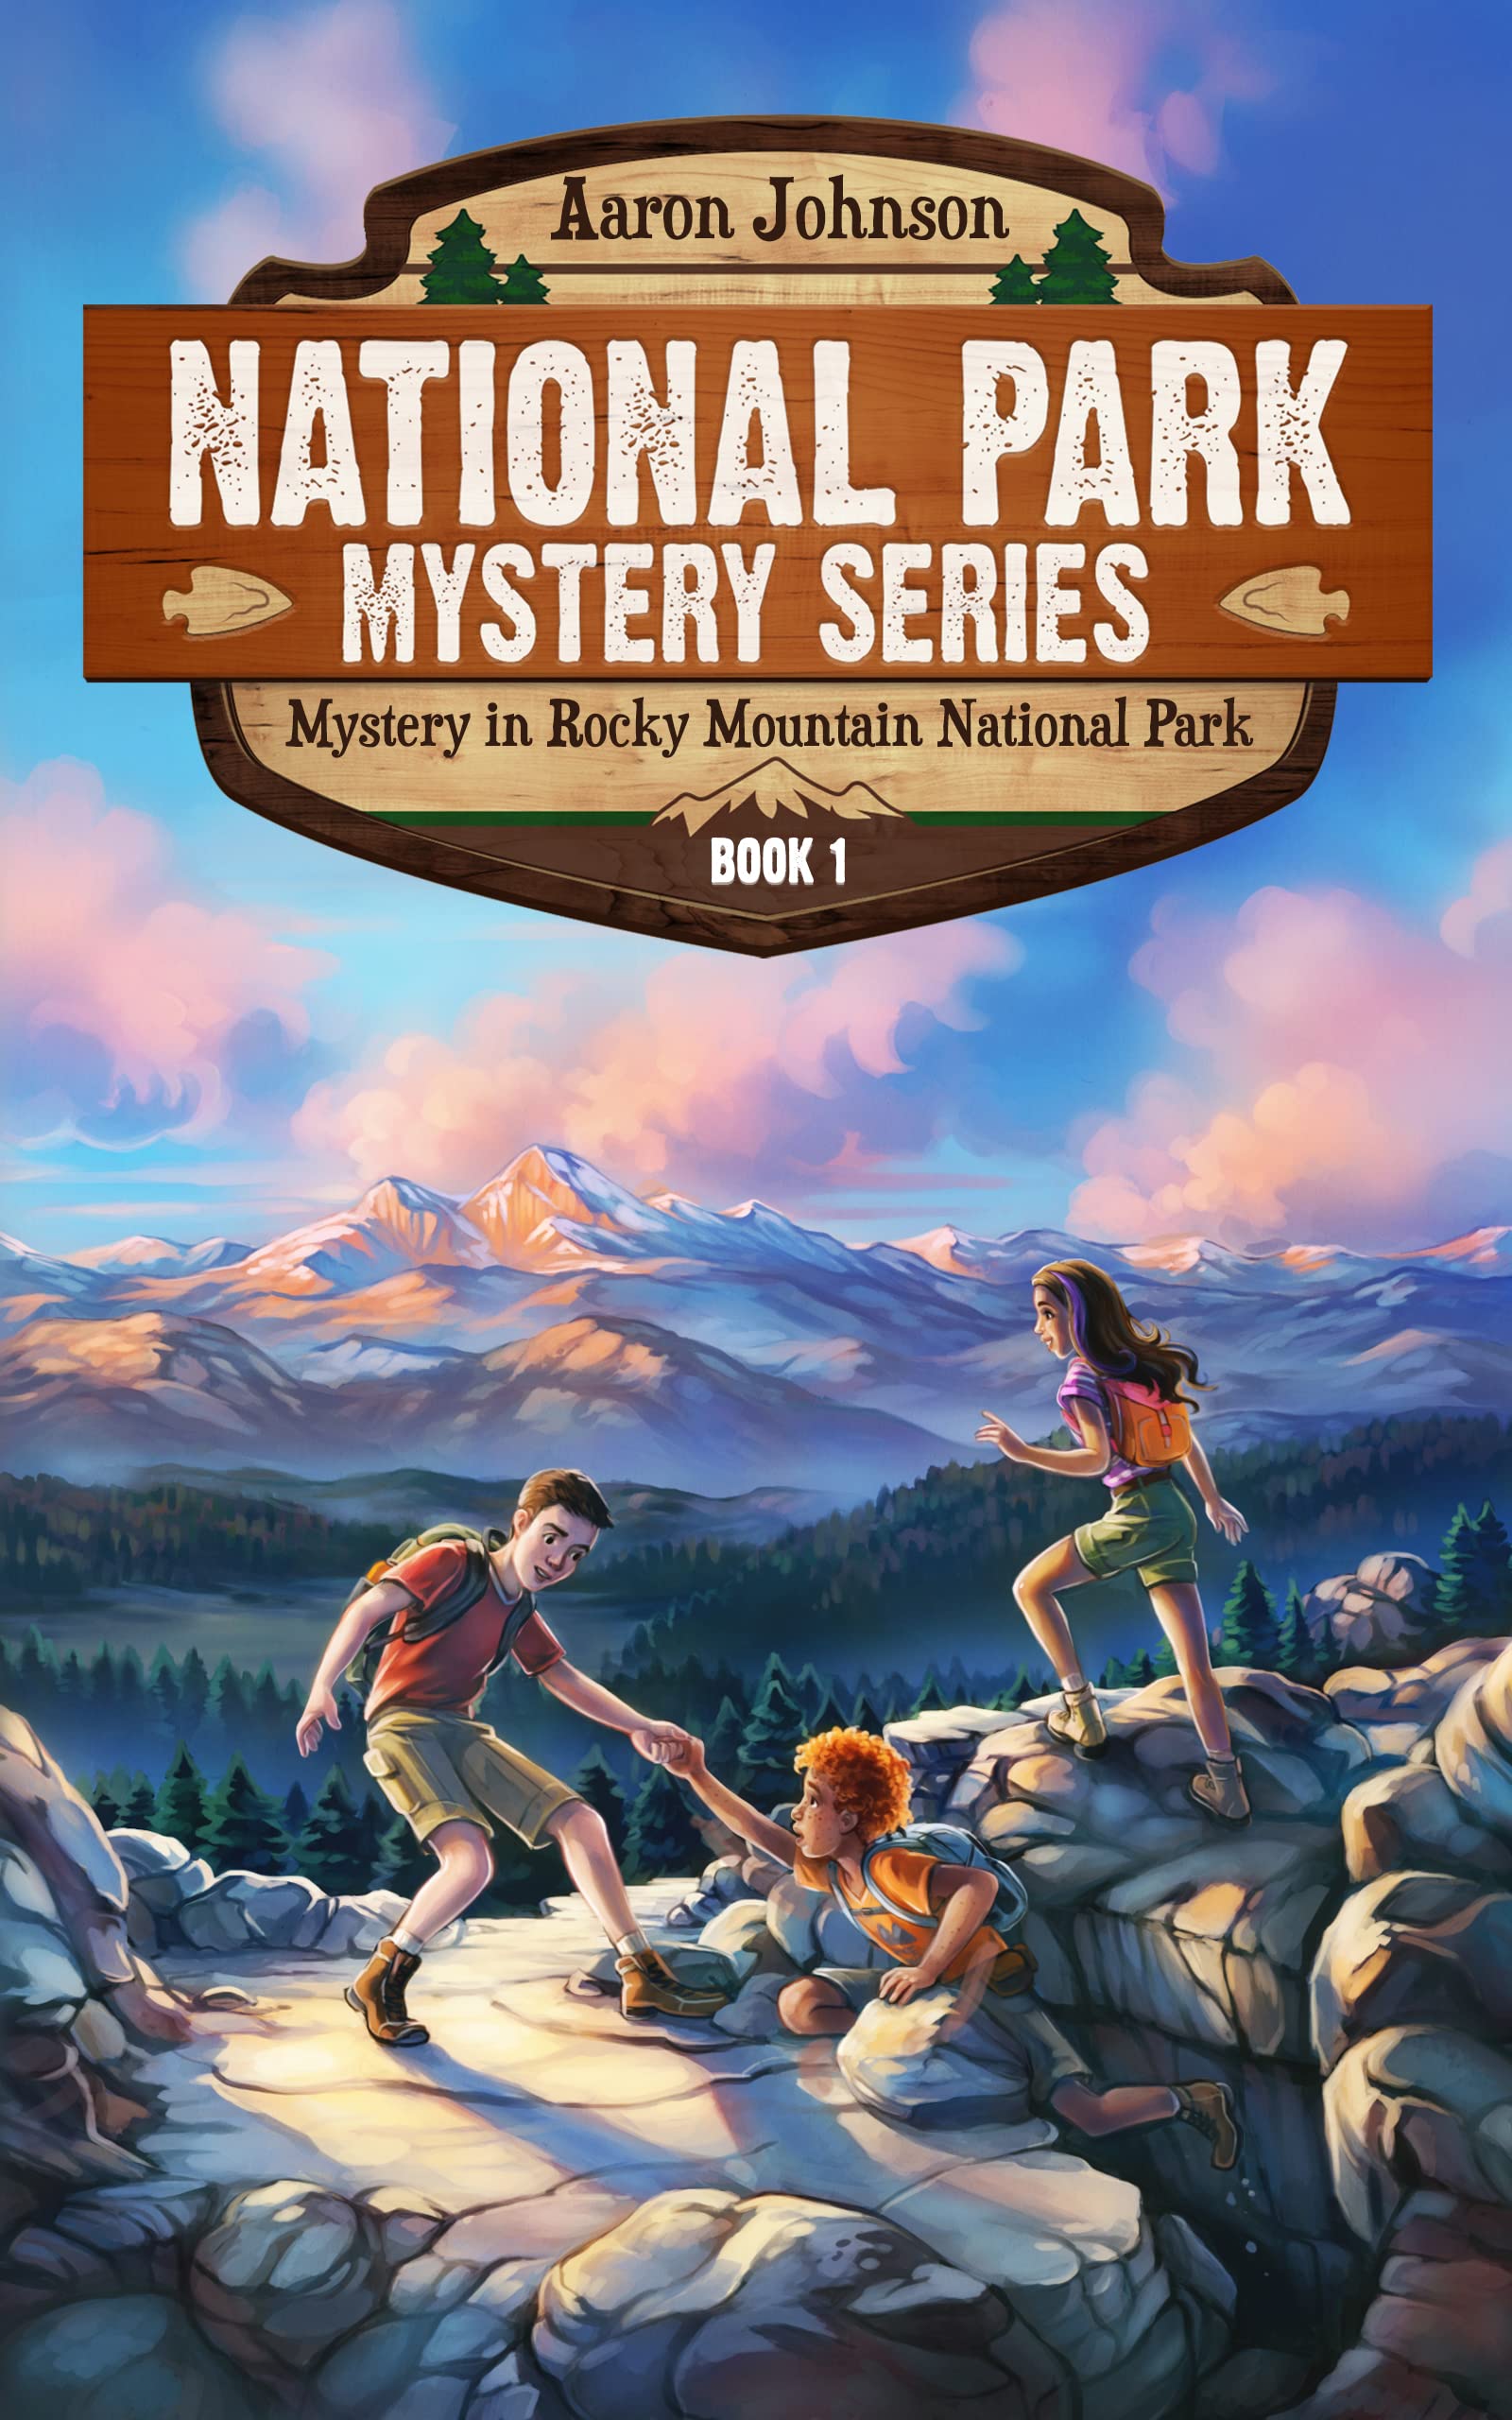 Mystery In Rocky Mountain National Park: A Mystery Adventure in the National Parks (National Park Mystery Series Book 1)